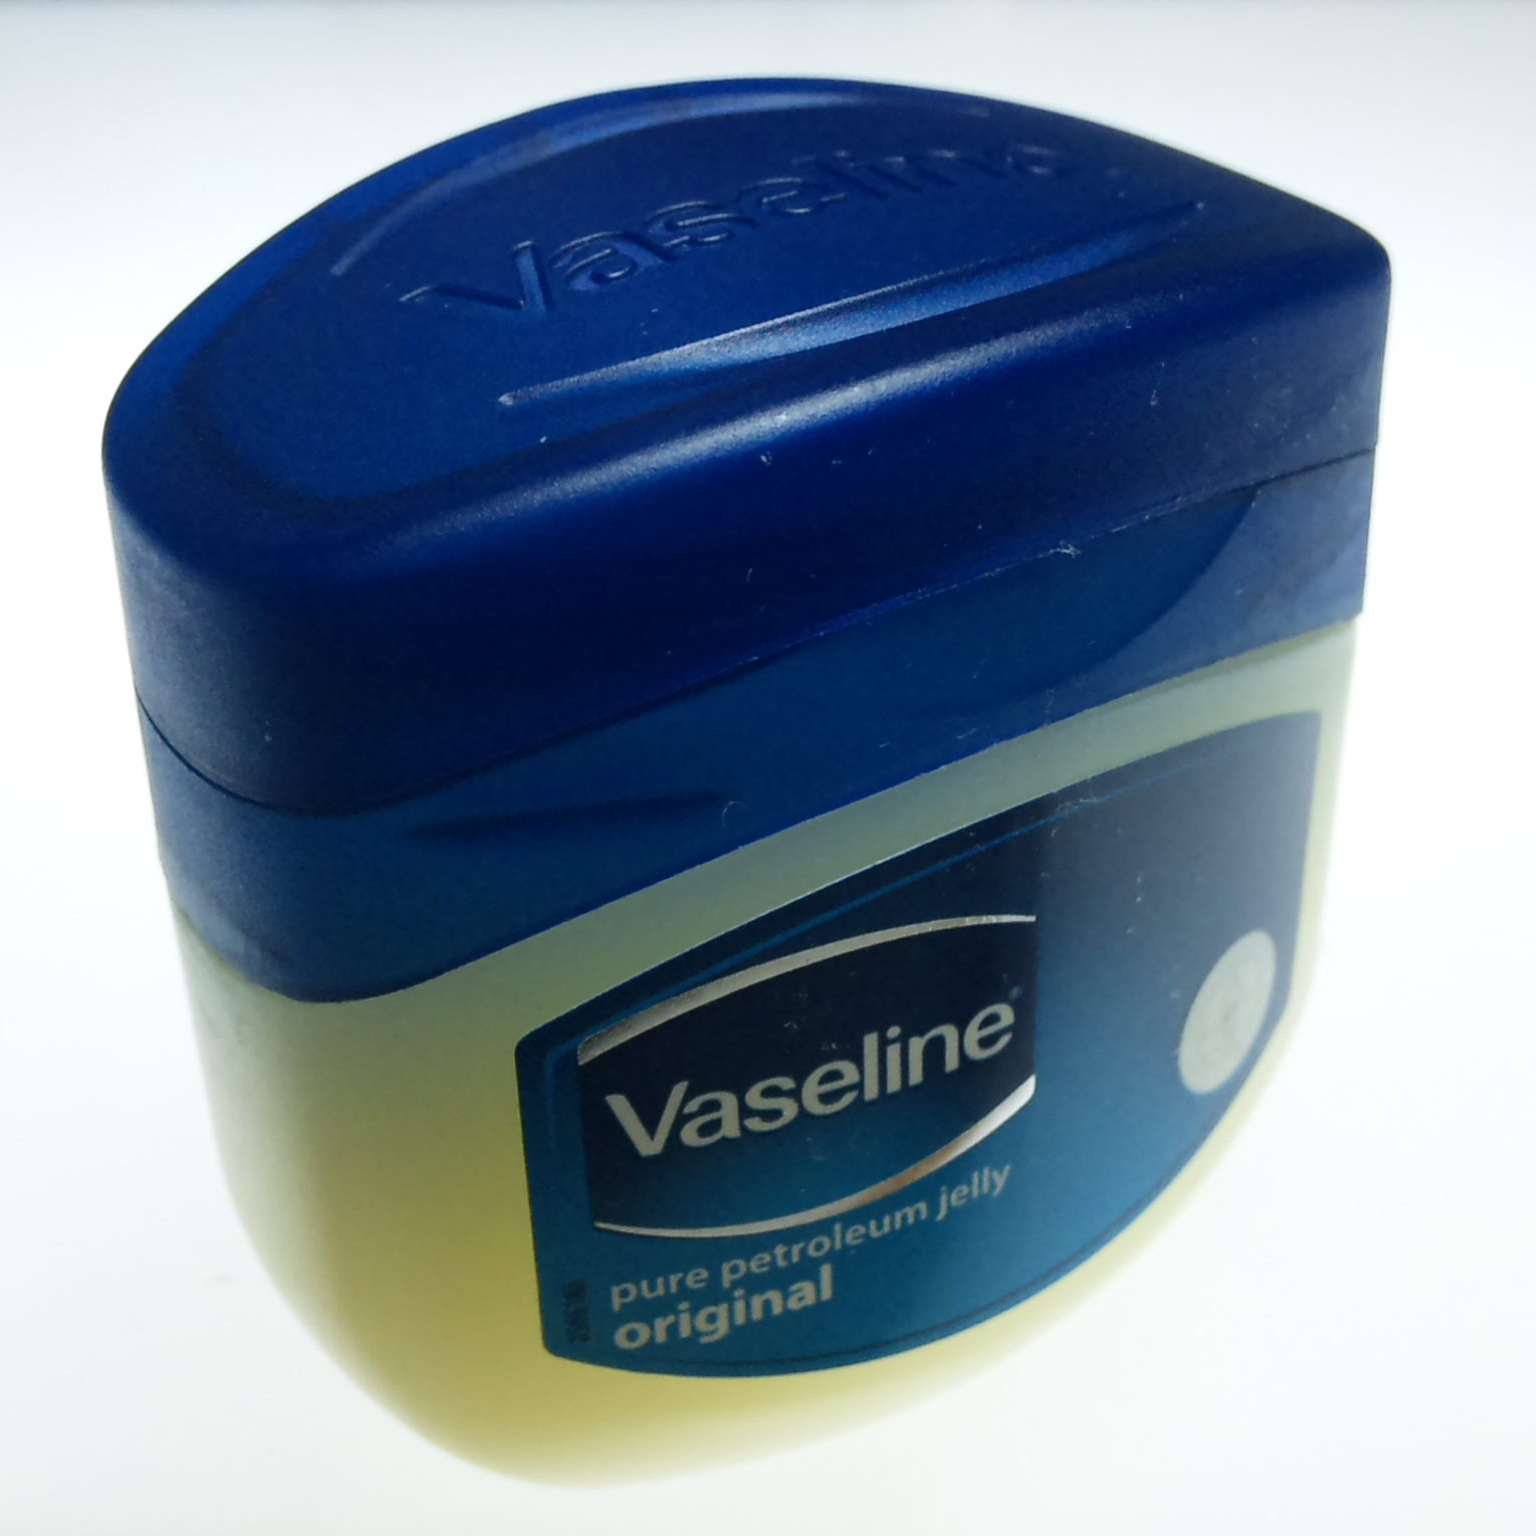 Vaseline for anal lube